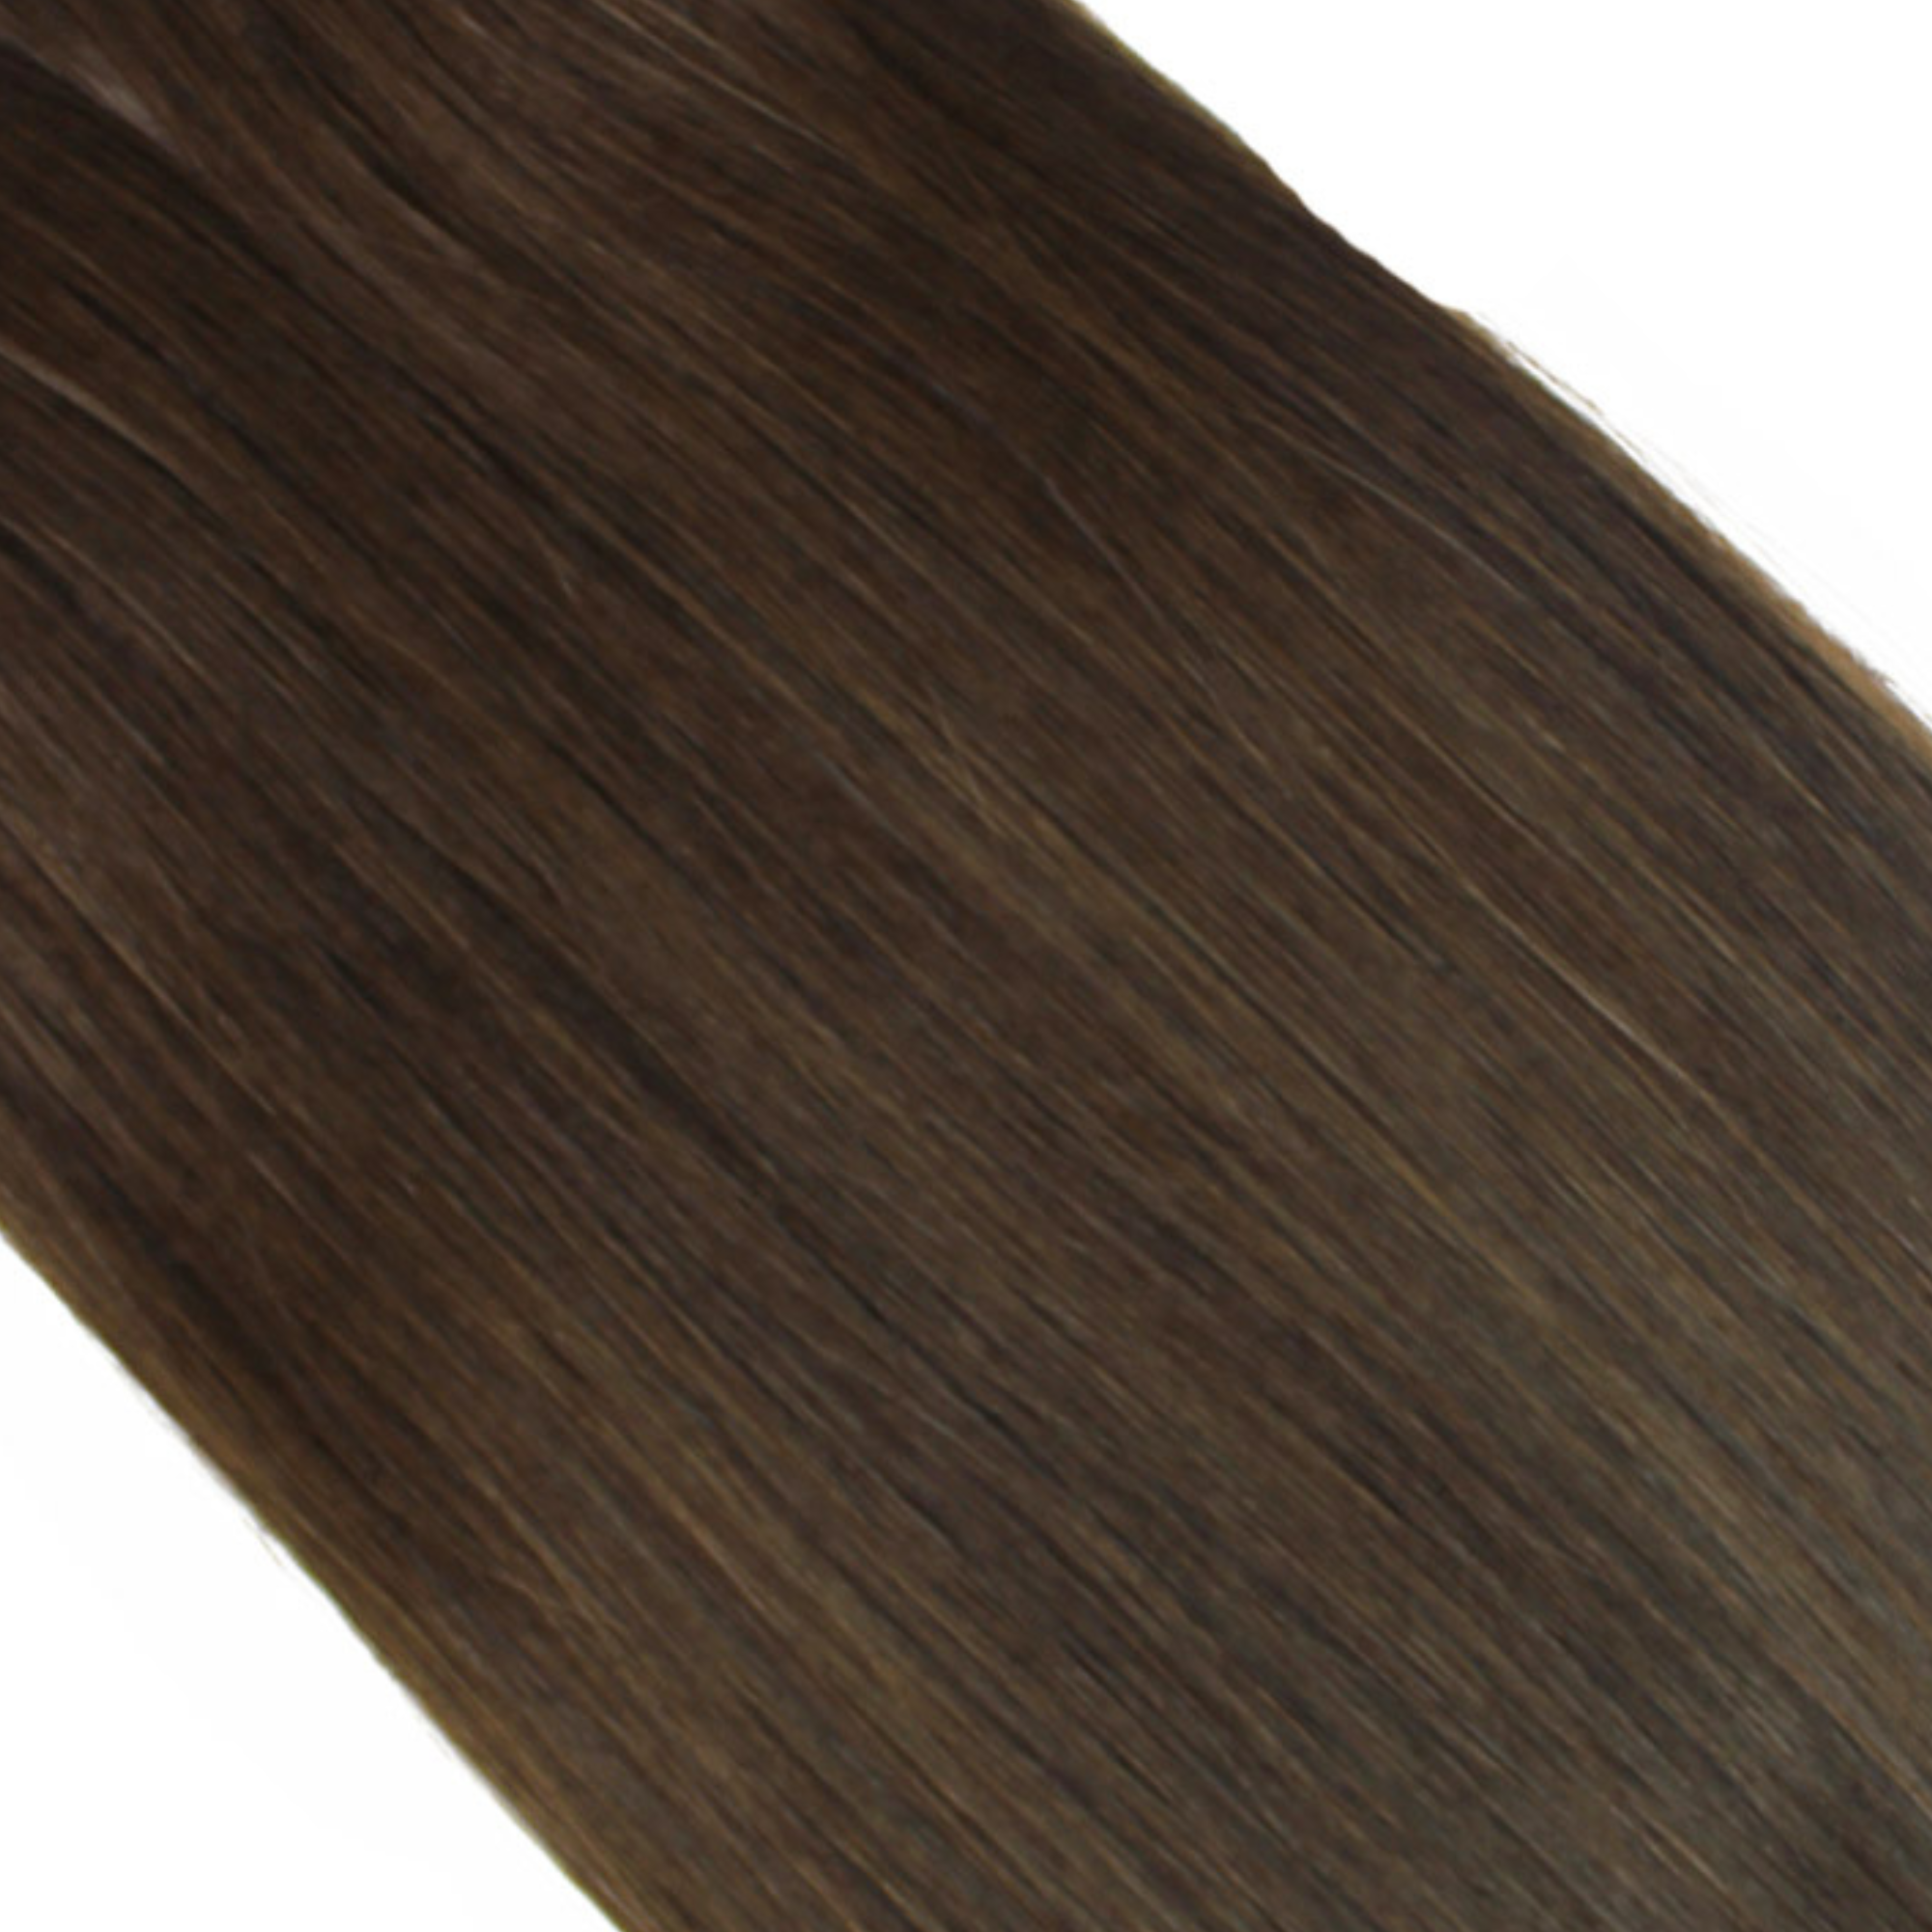 "hair rehab london 14" weft hair extensions shade swatch titled paparazzi perfect"